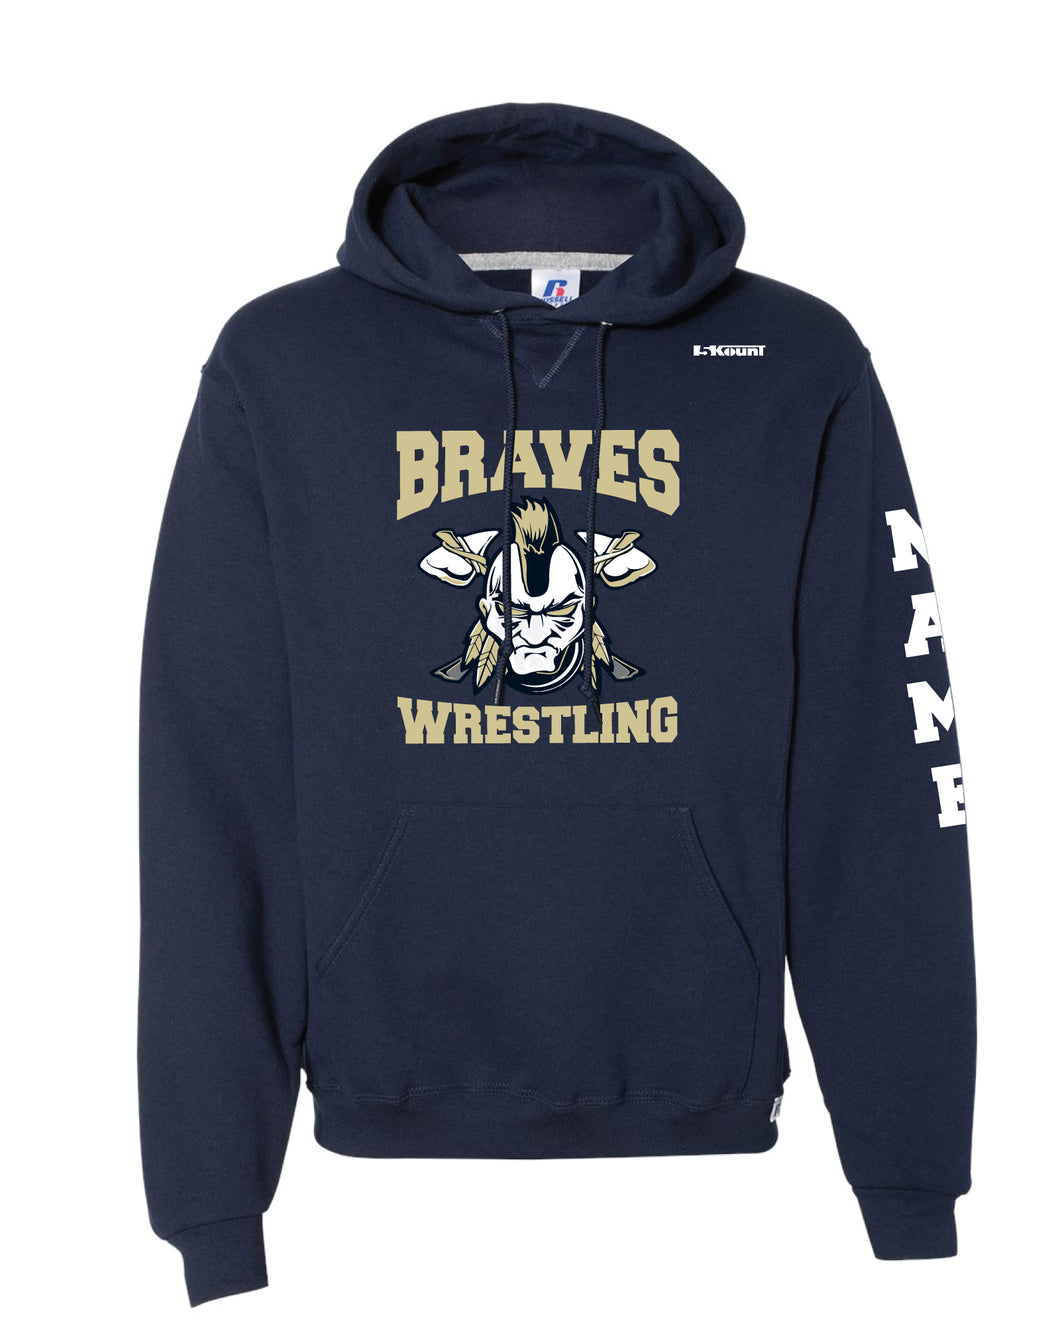 Braves Wrestling Russell Athletic Cotton Hoodie - Navy